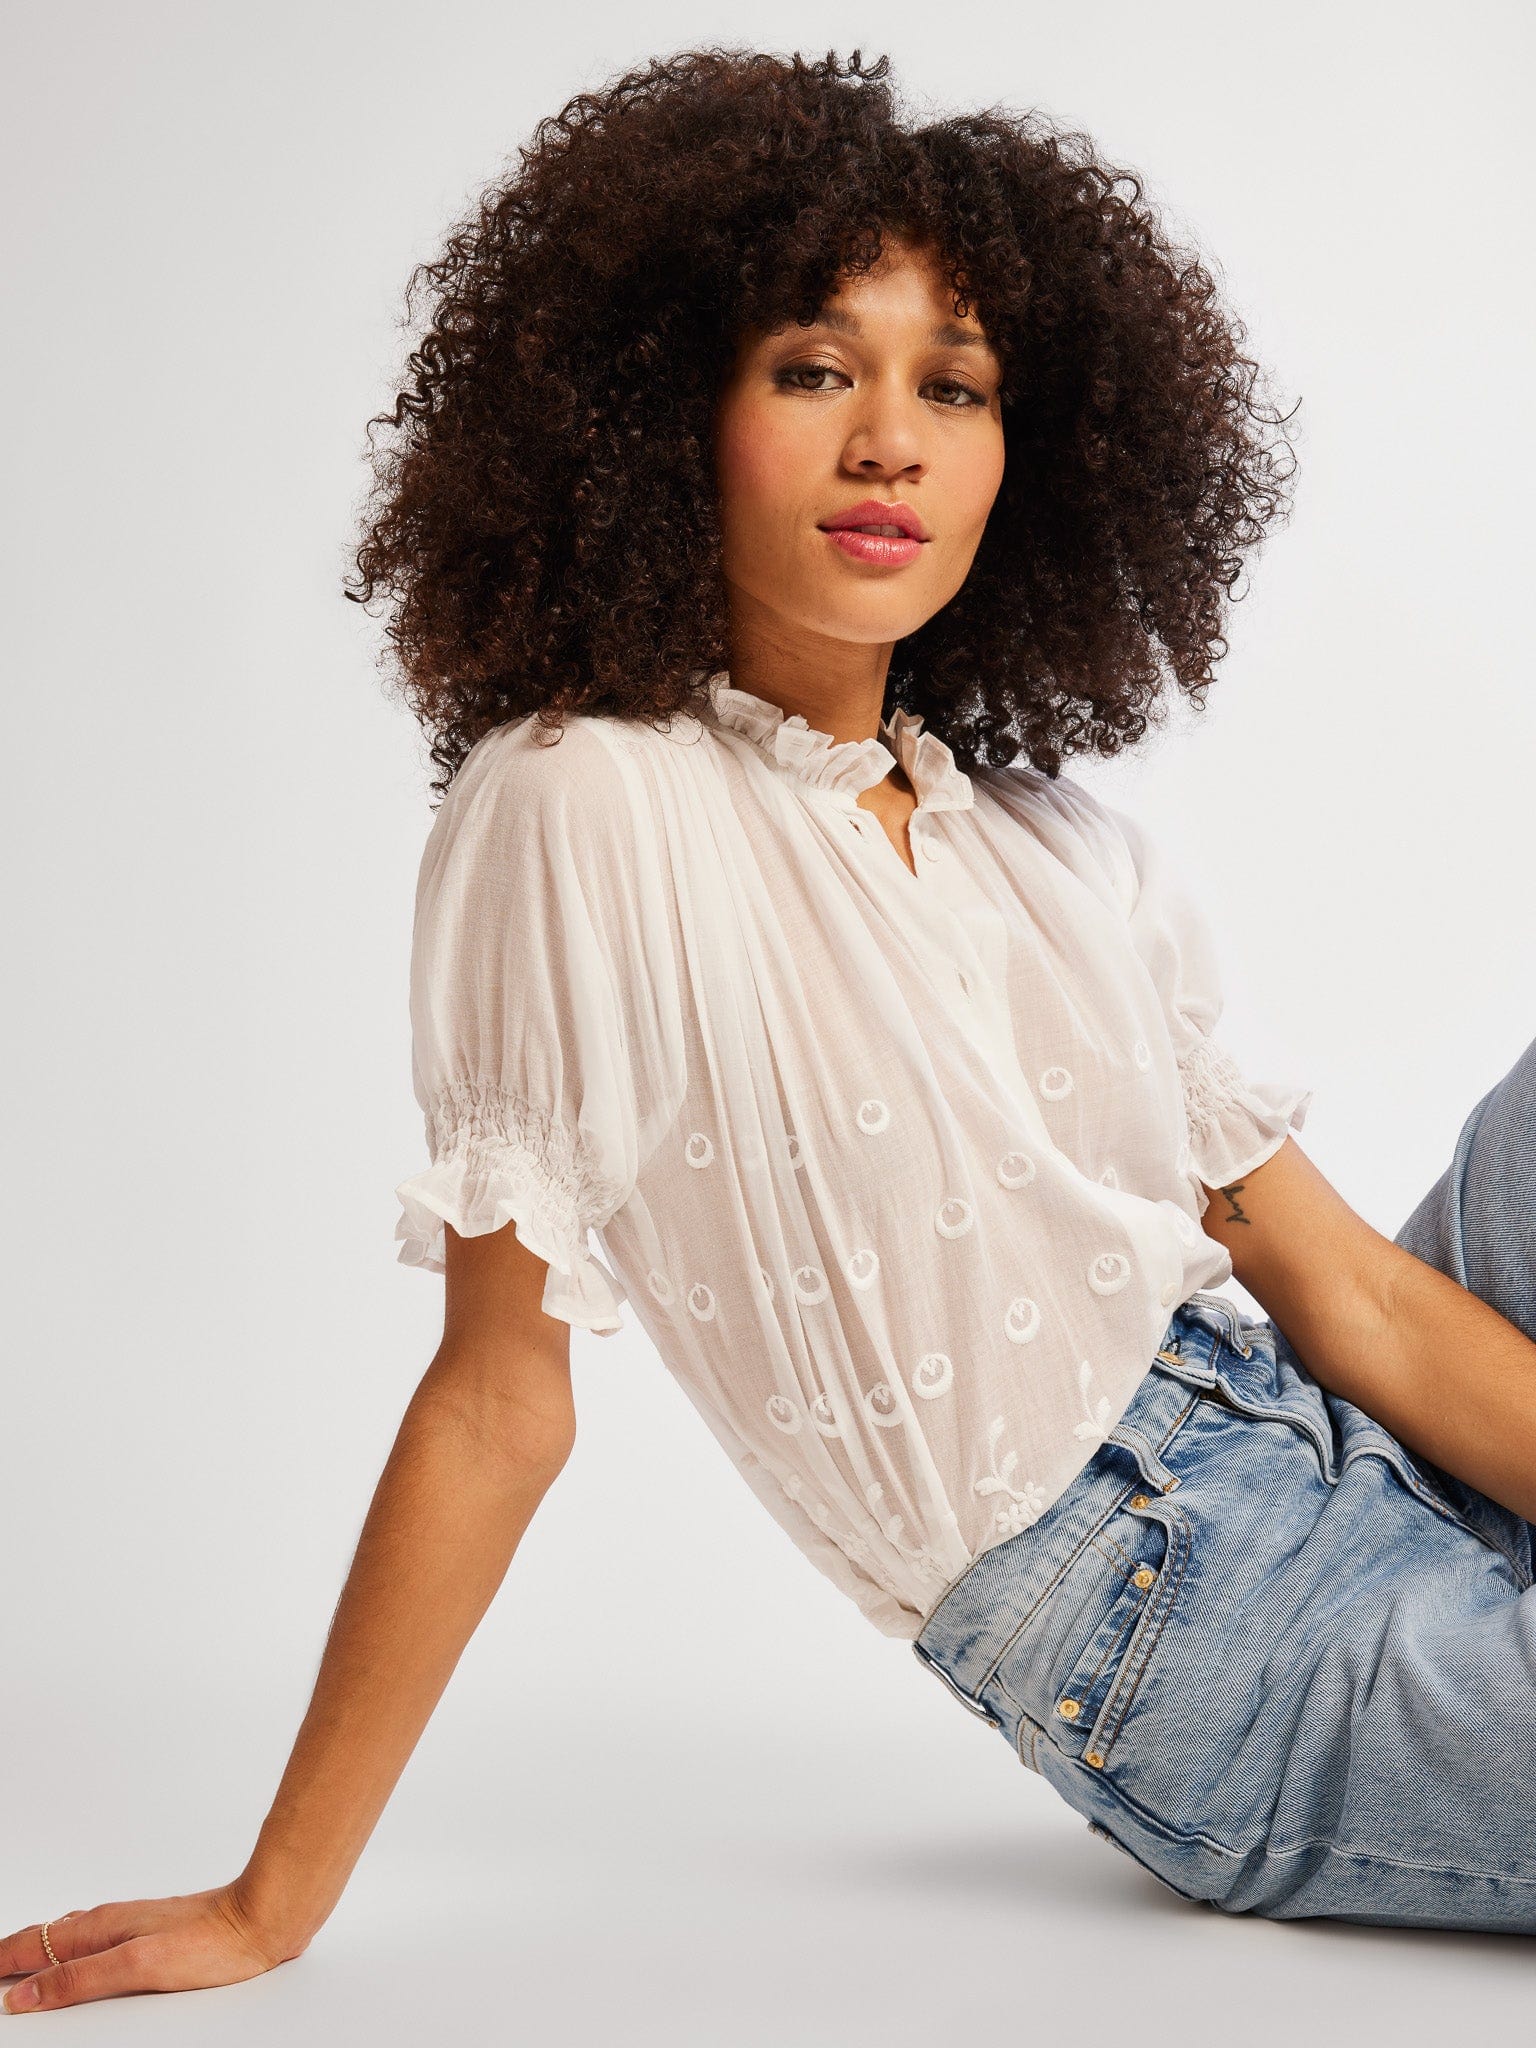 MILLE Clothing Marnie Top in White Petal Embroidery